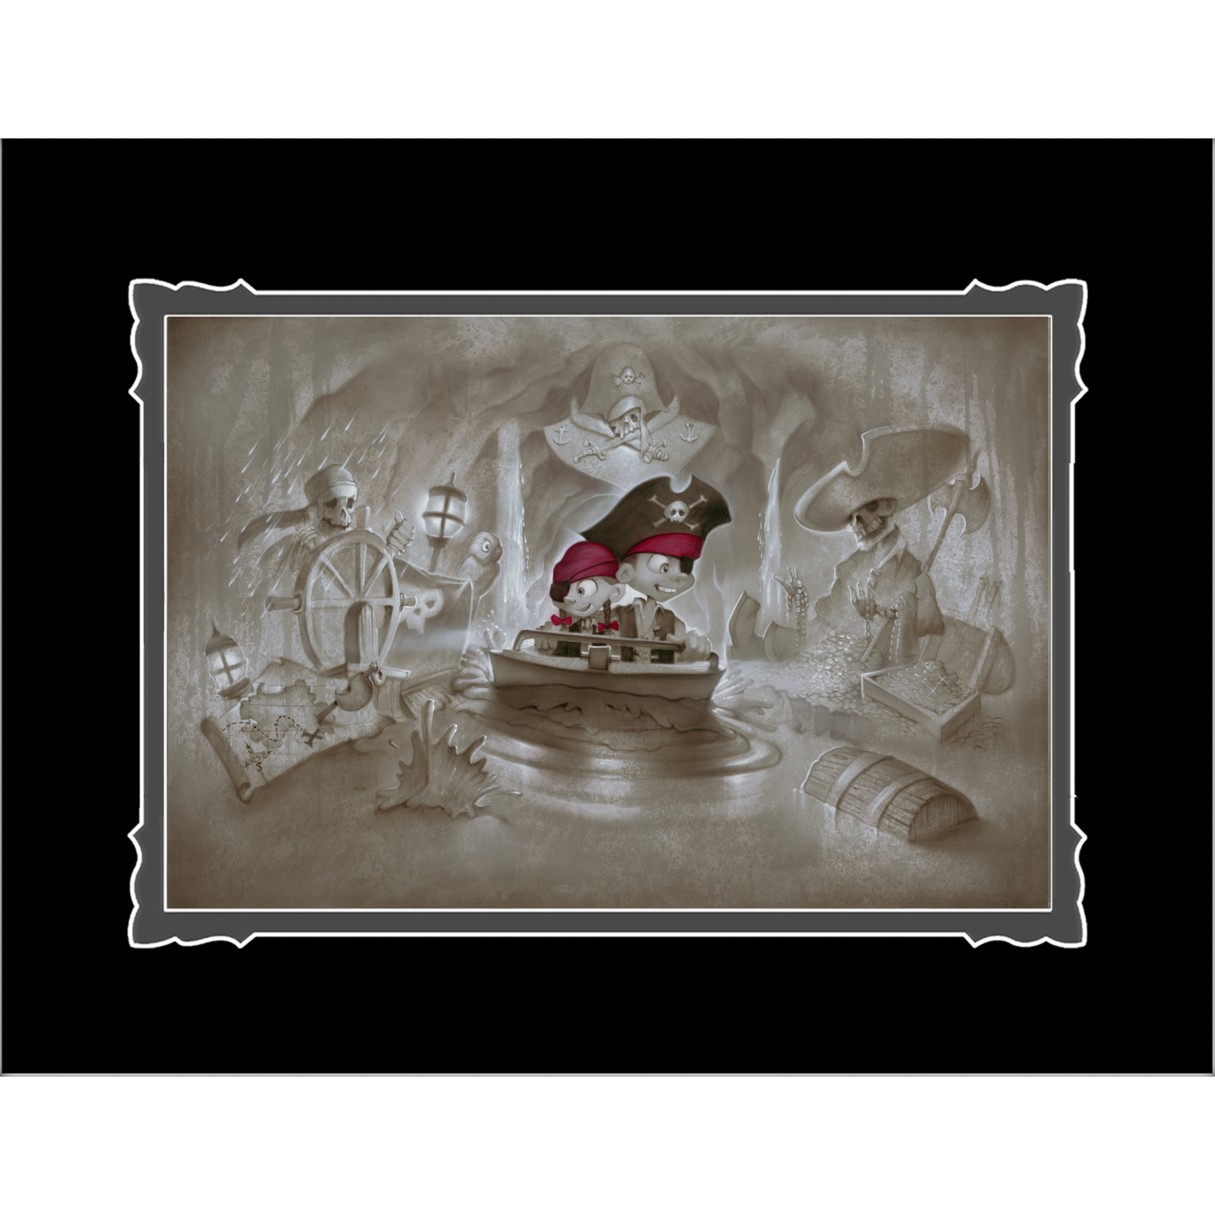 Pirates of the Caribbean ''Thar' Be Pirates in These Parts'' Deluxe Print by Noah